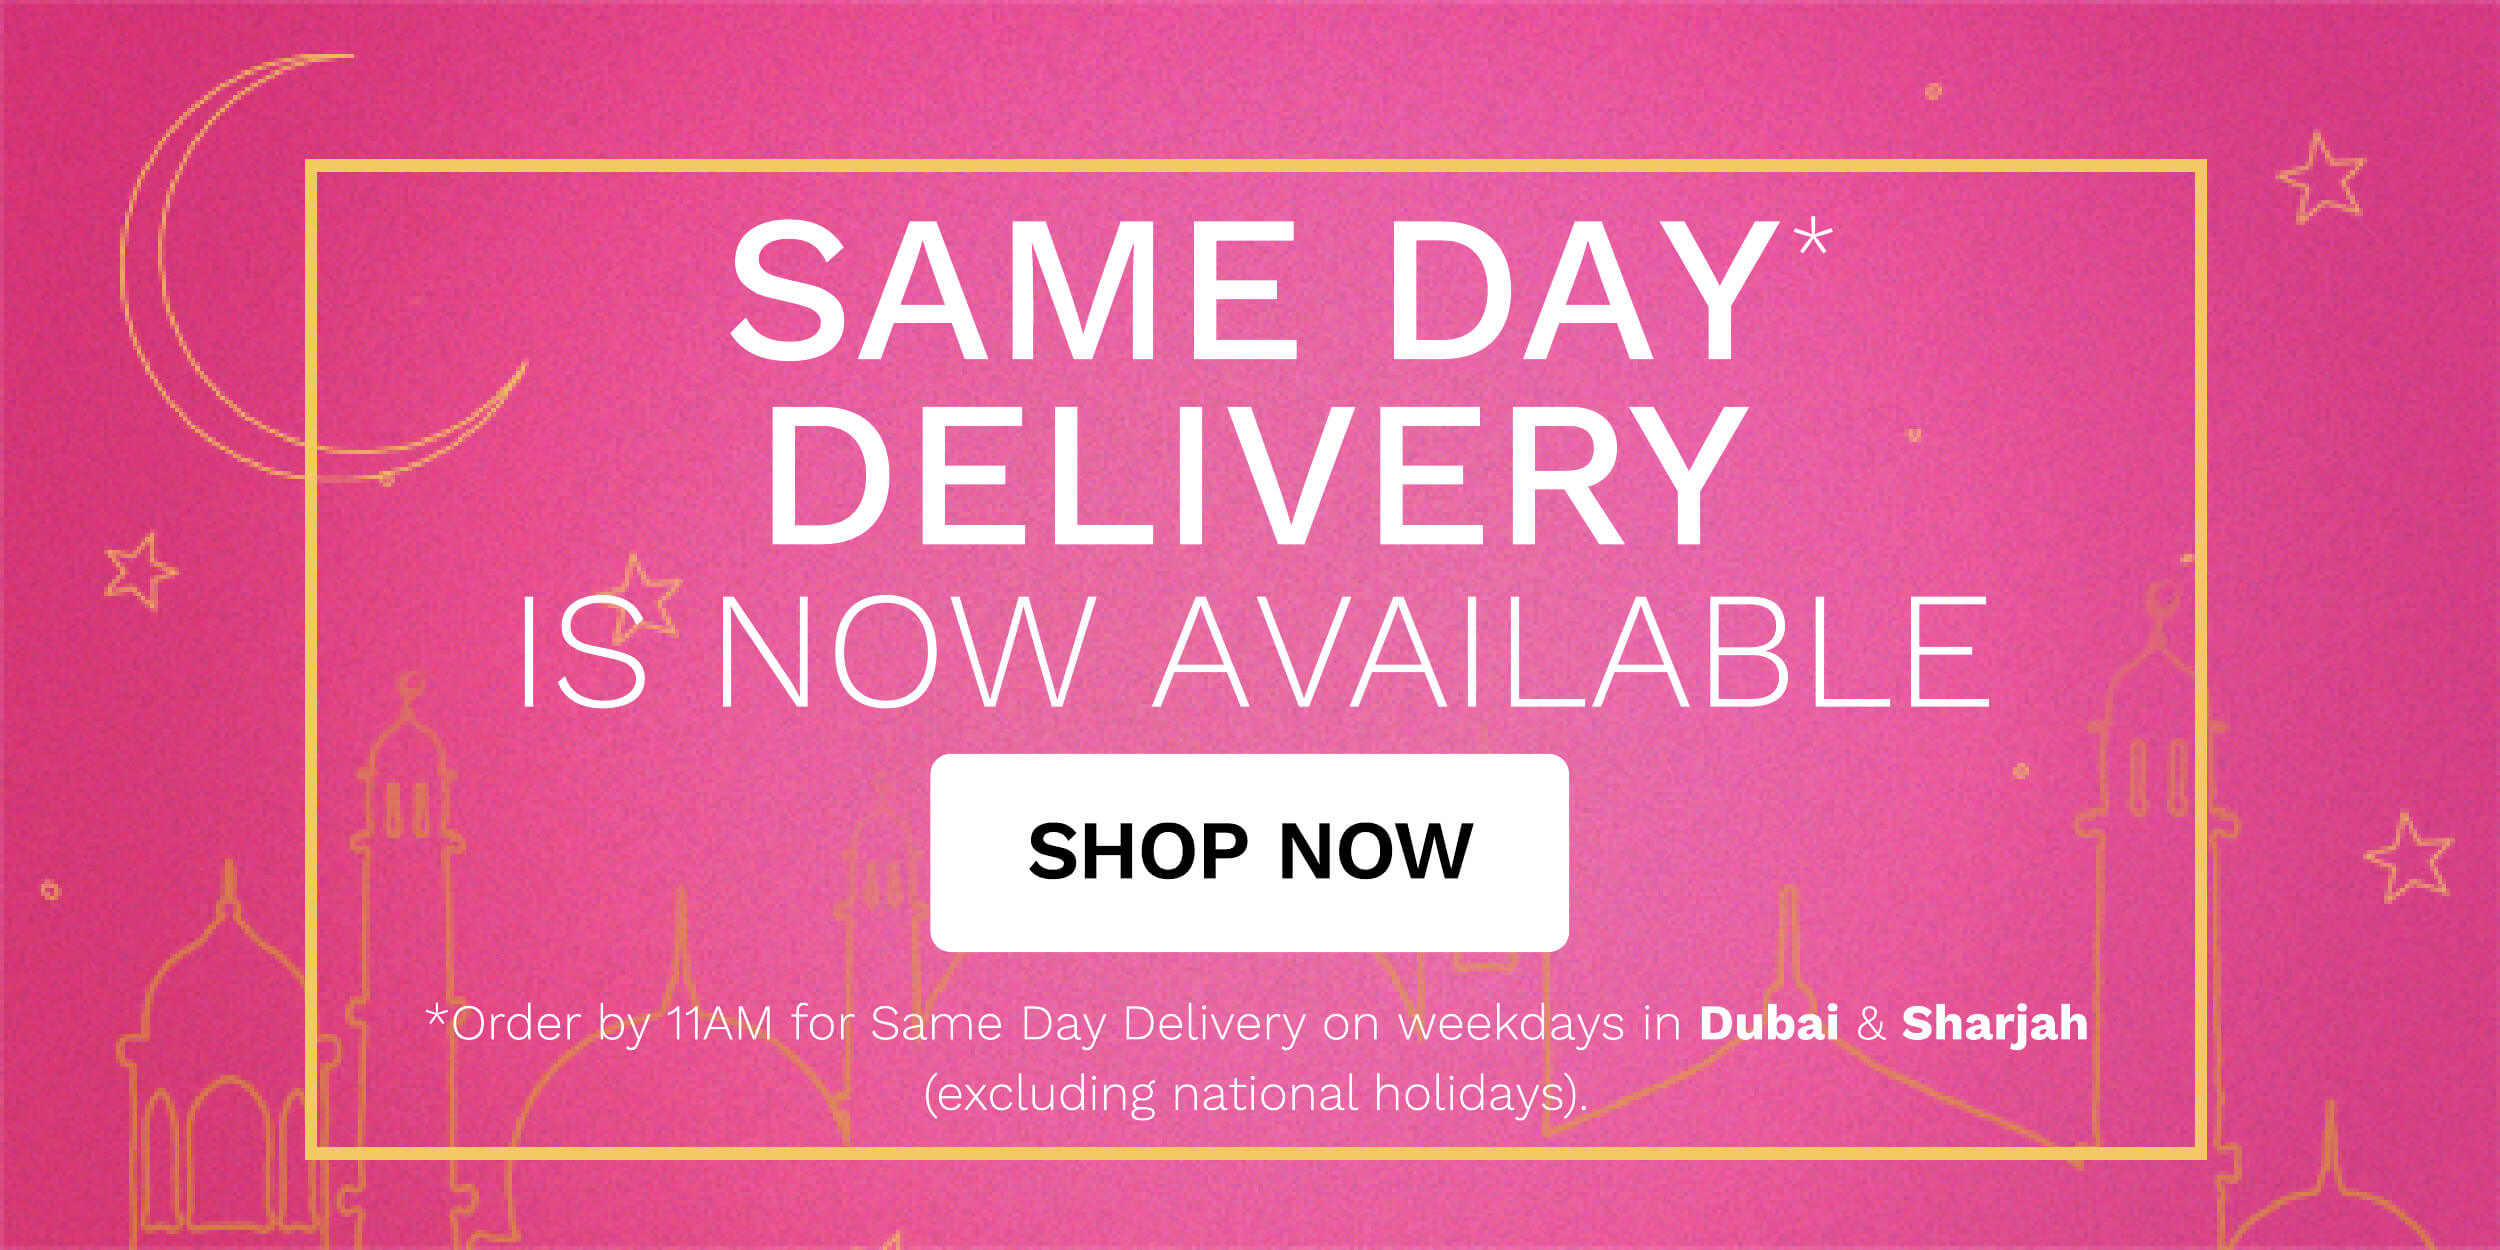 SAME DAY - DELIVERY IS NOW AVAILABLE *Qrder by 11AM for Same Day Delivery on weekdays in Dubai Sharjah excluding national holidays. 